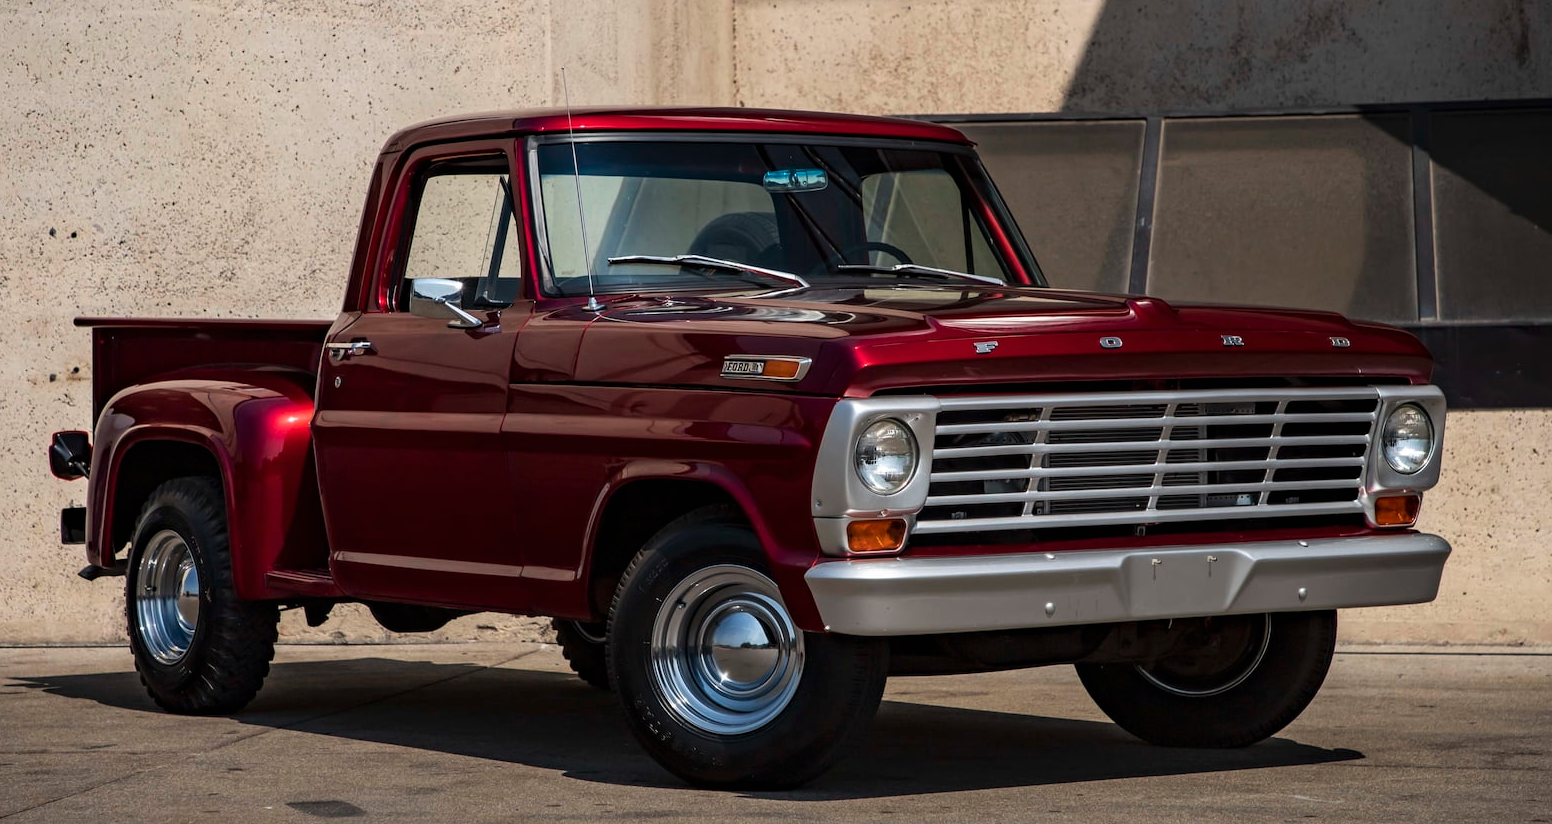 Ford Truck History From The Model Tt To The Modern F Series